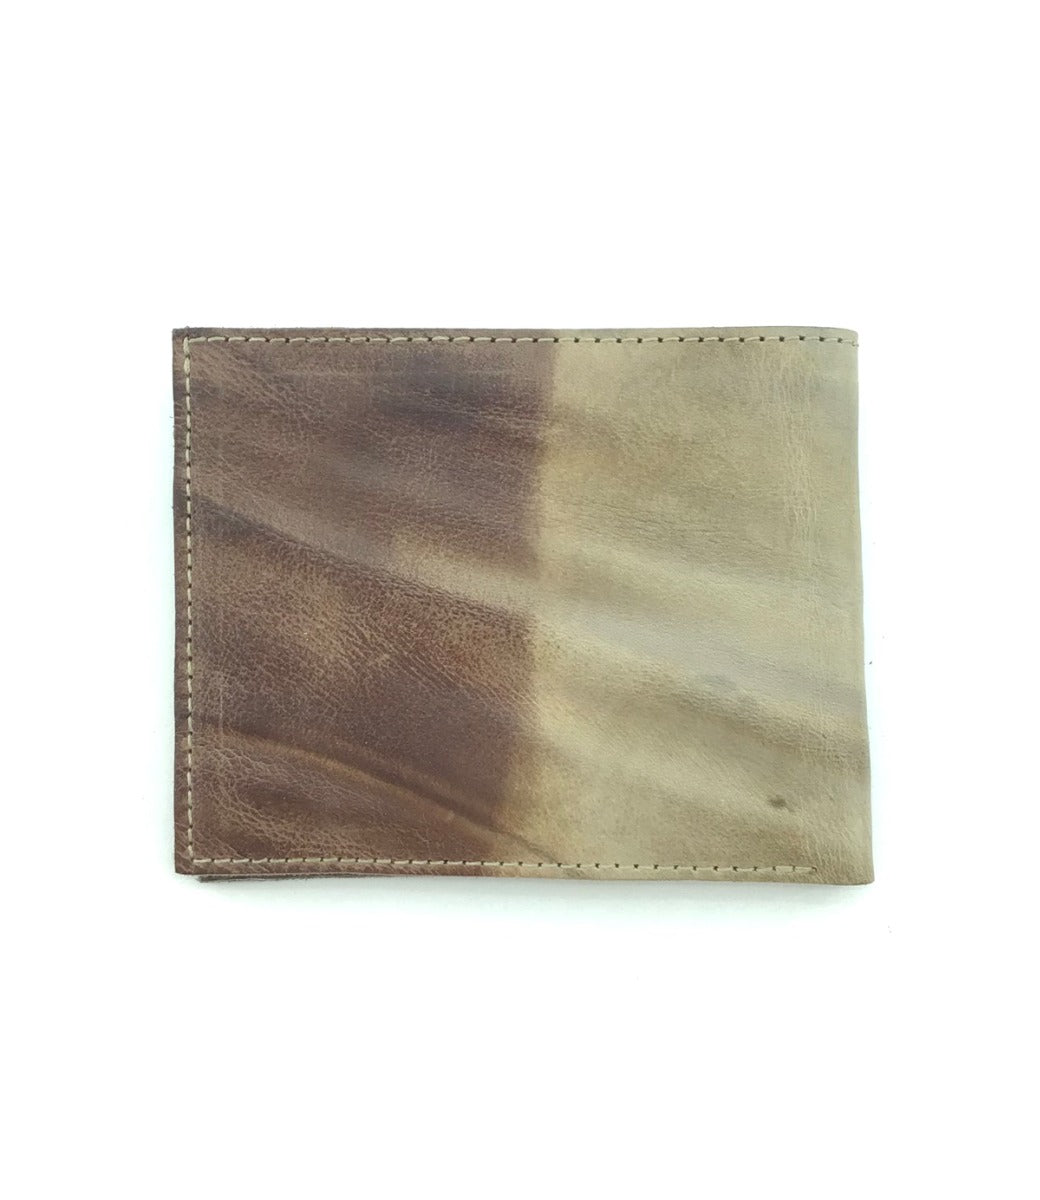 A brown and tan Bed Stu Amidala leather wallet on a white background.